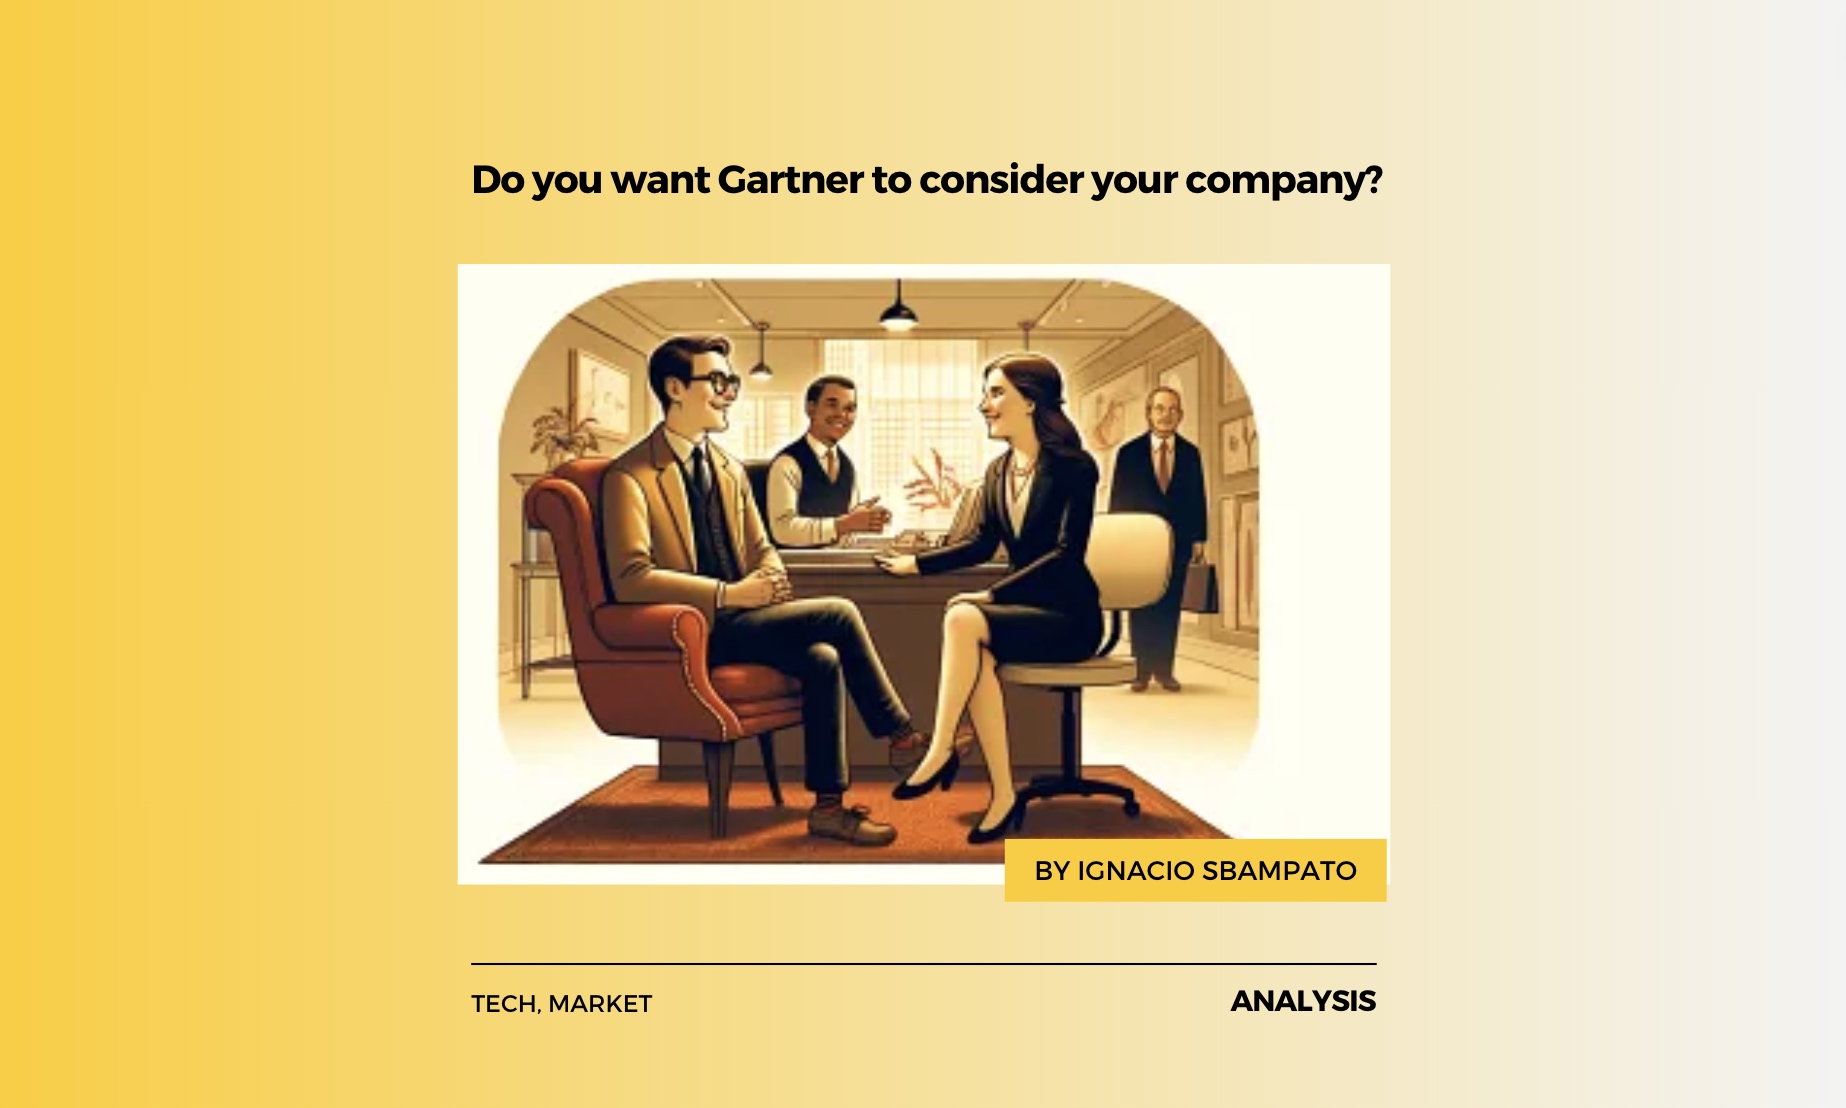 Do you want Gartner to consider your company?